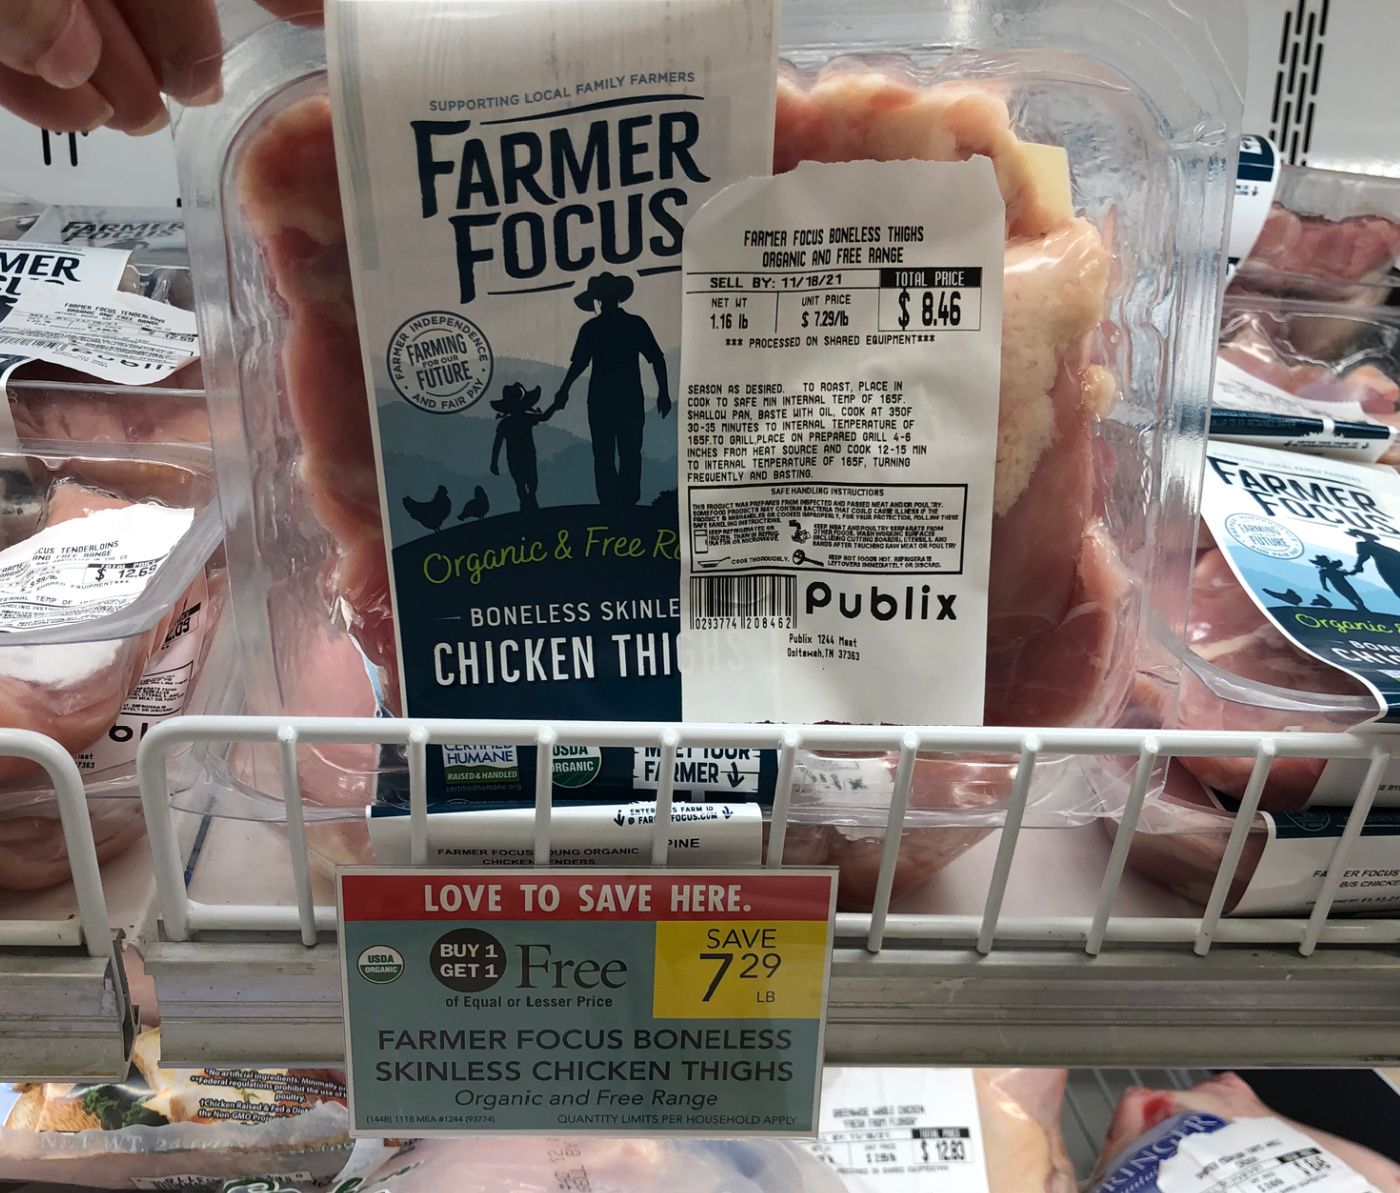 Farmer Focus Chicken Thighs Are Buy One, Get One FREE At Publix - Stock Your Freezer! on I Heart Publix